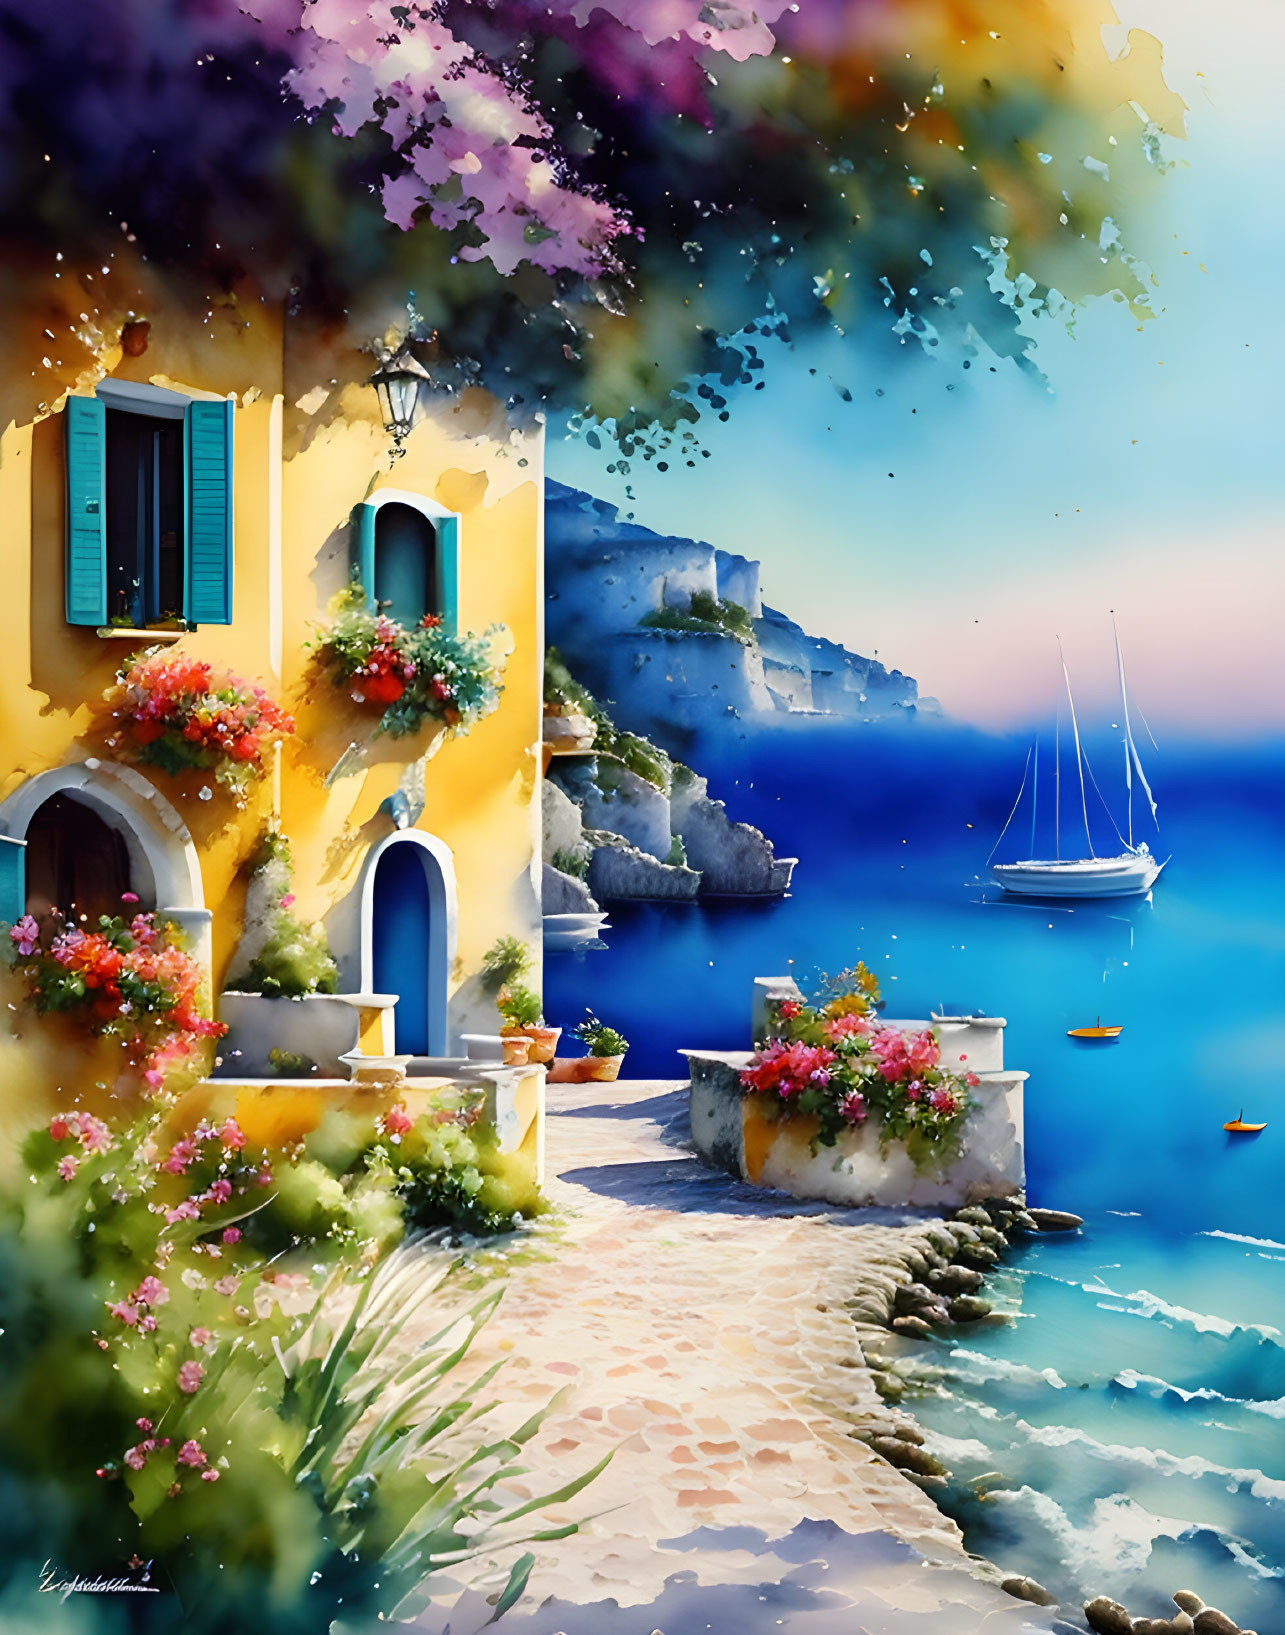 Seaside painting: Yellow building, flowers, cobblestone path, blue ocean, sailboats,